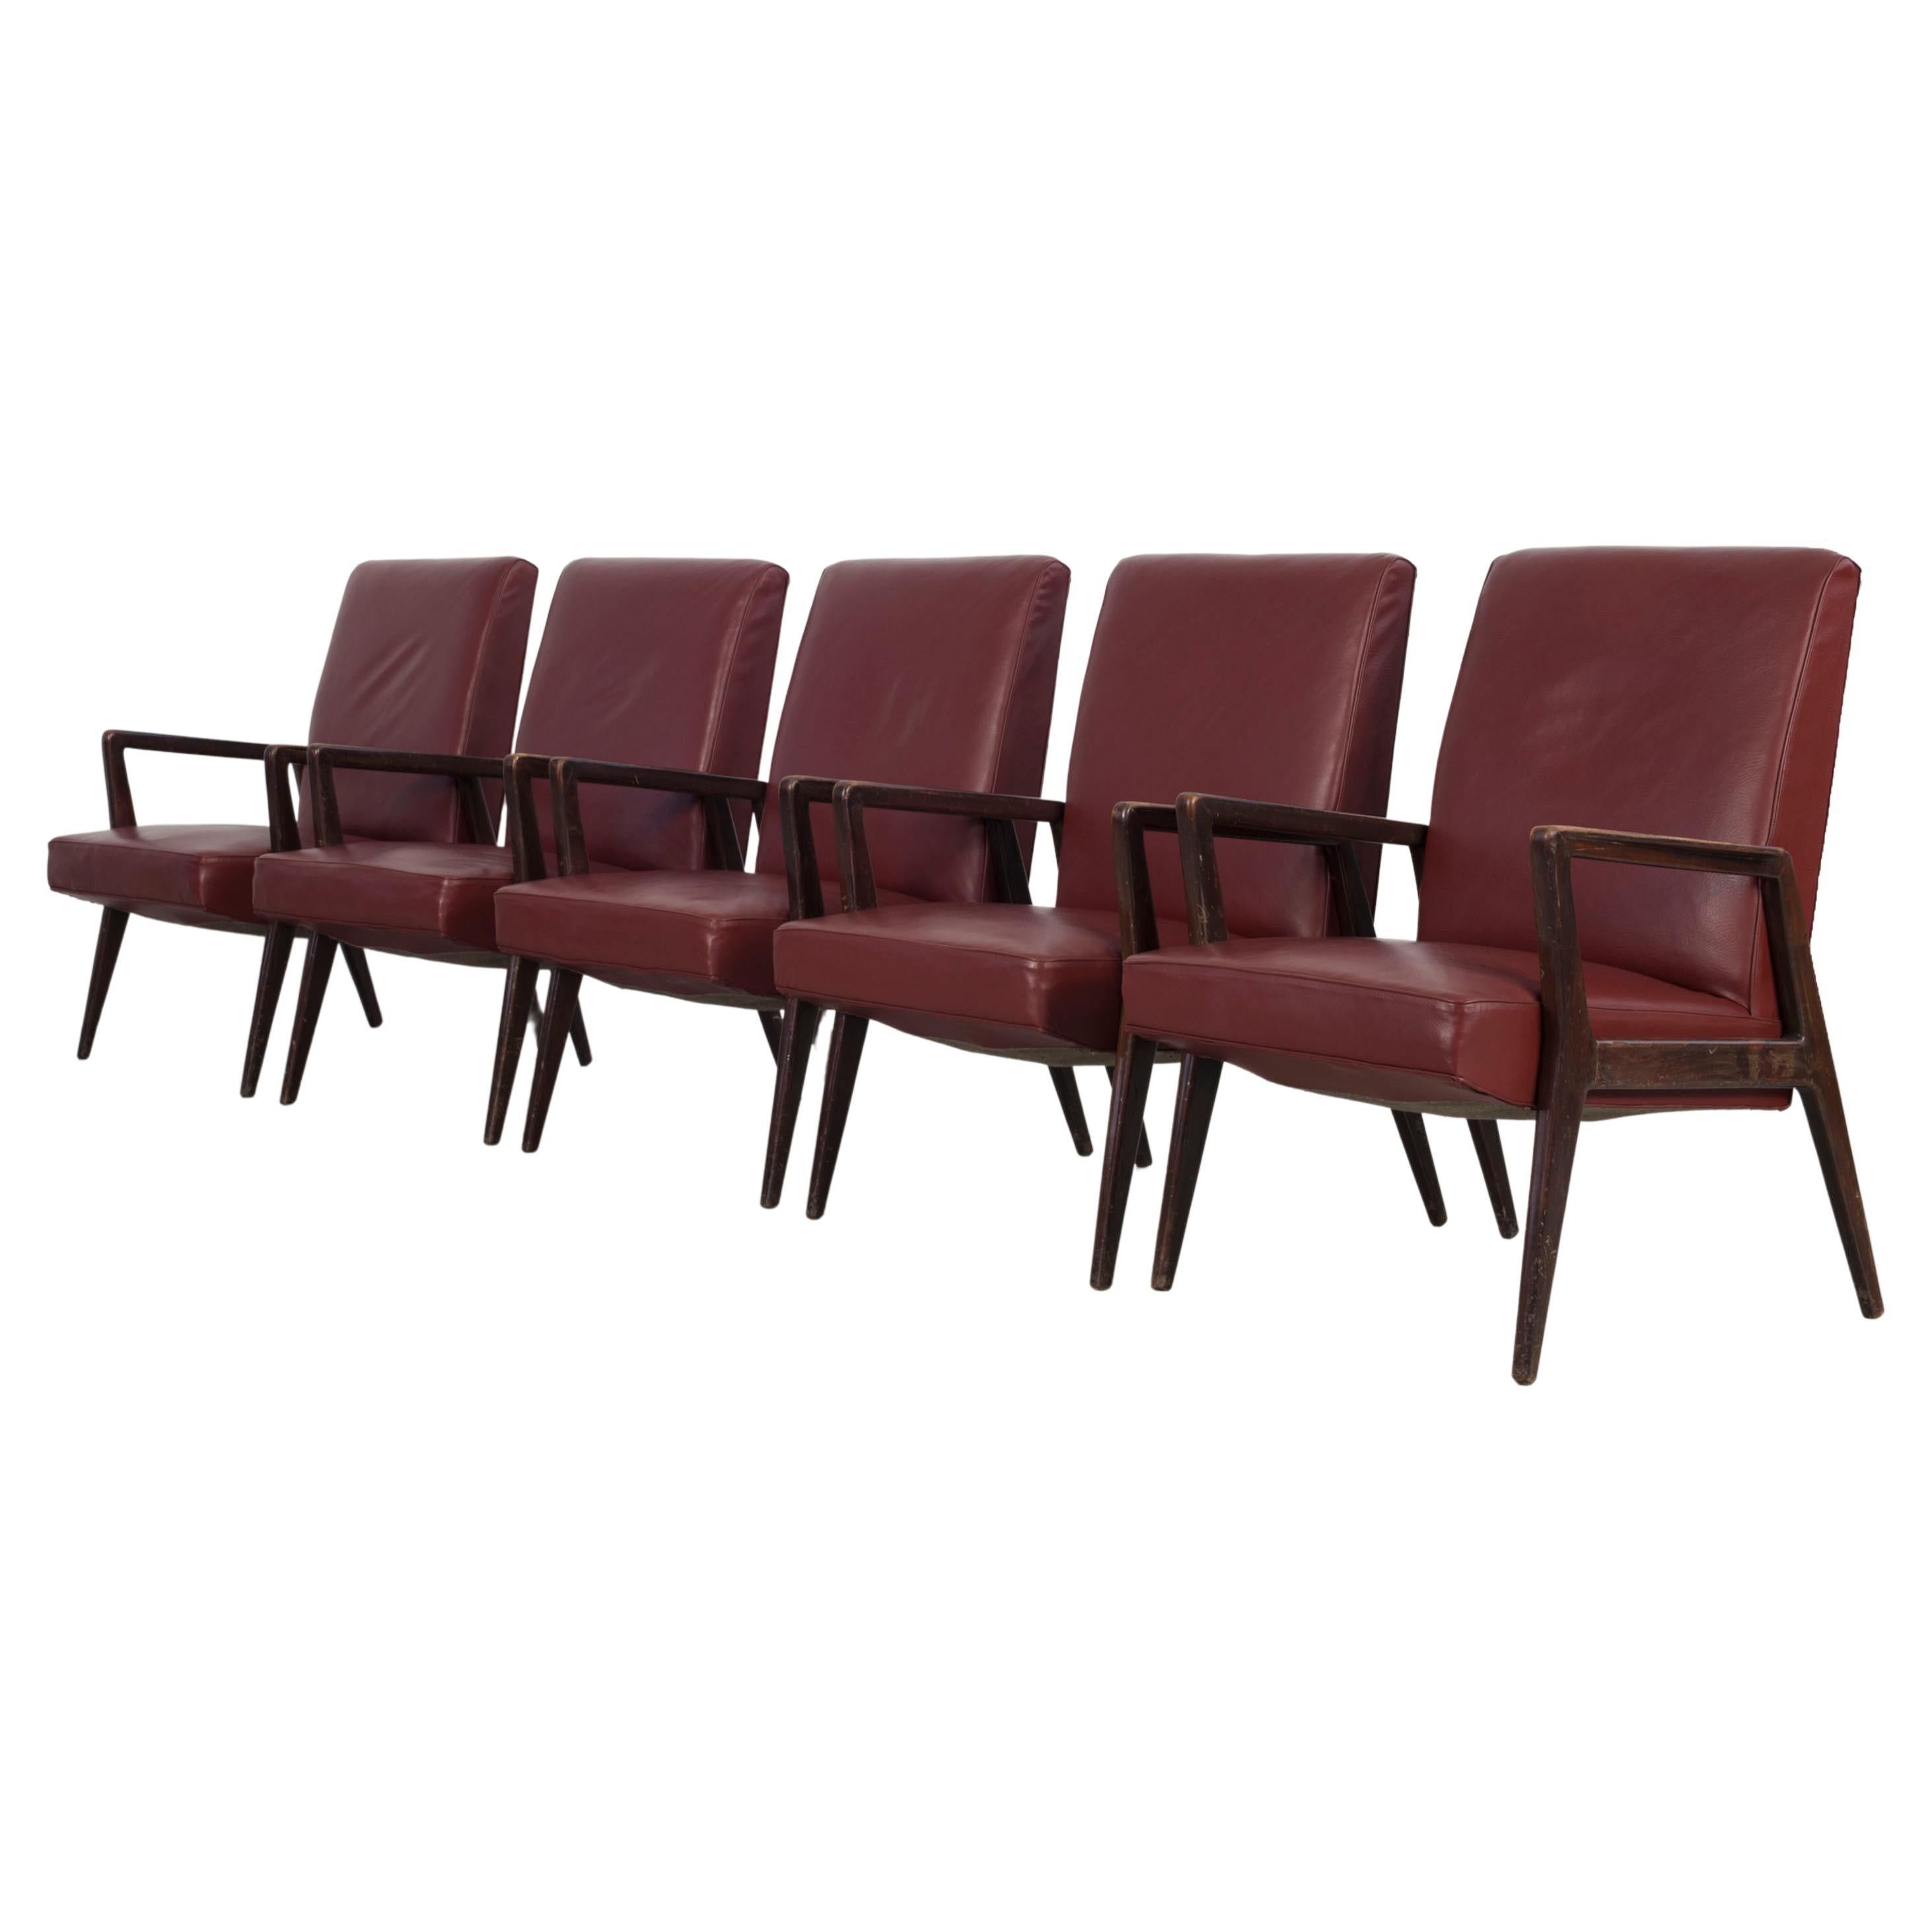 Set of 5 Dark Red Leatherette Armchairs, Italy 1960s For Sale